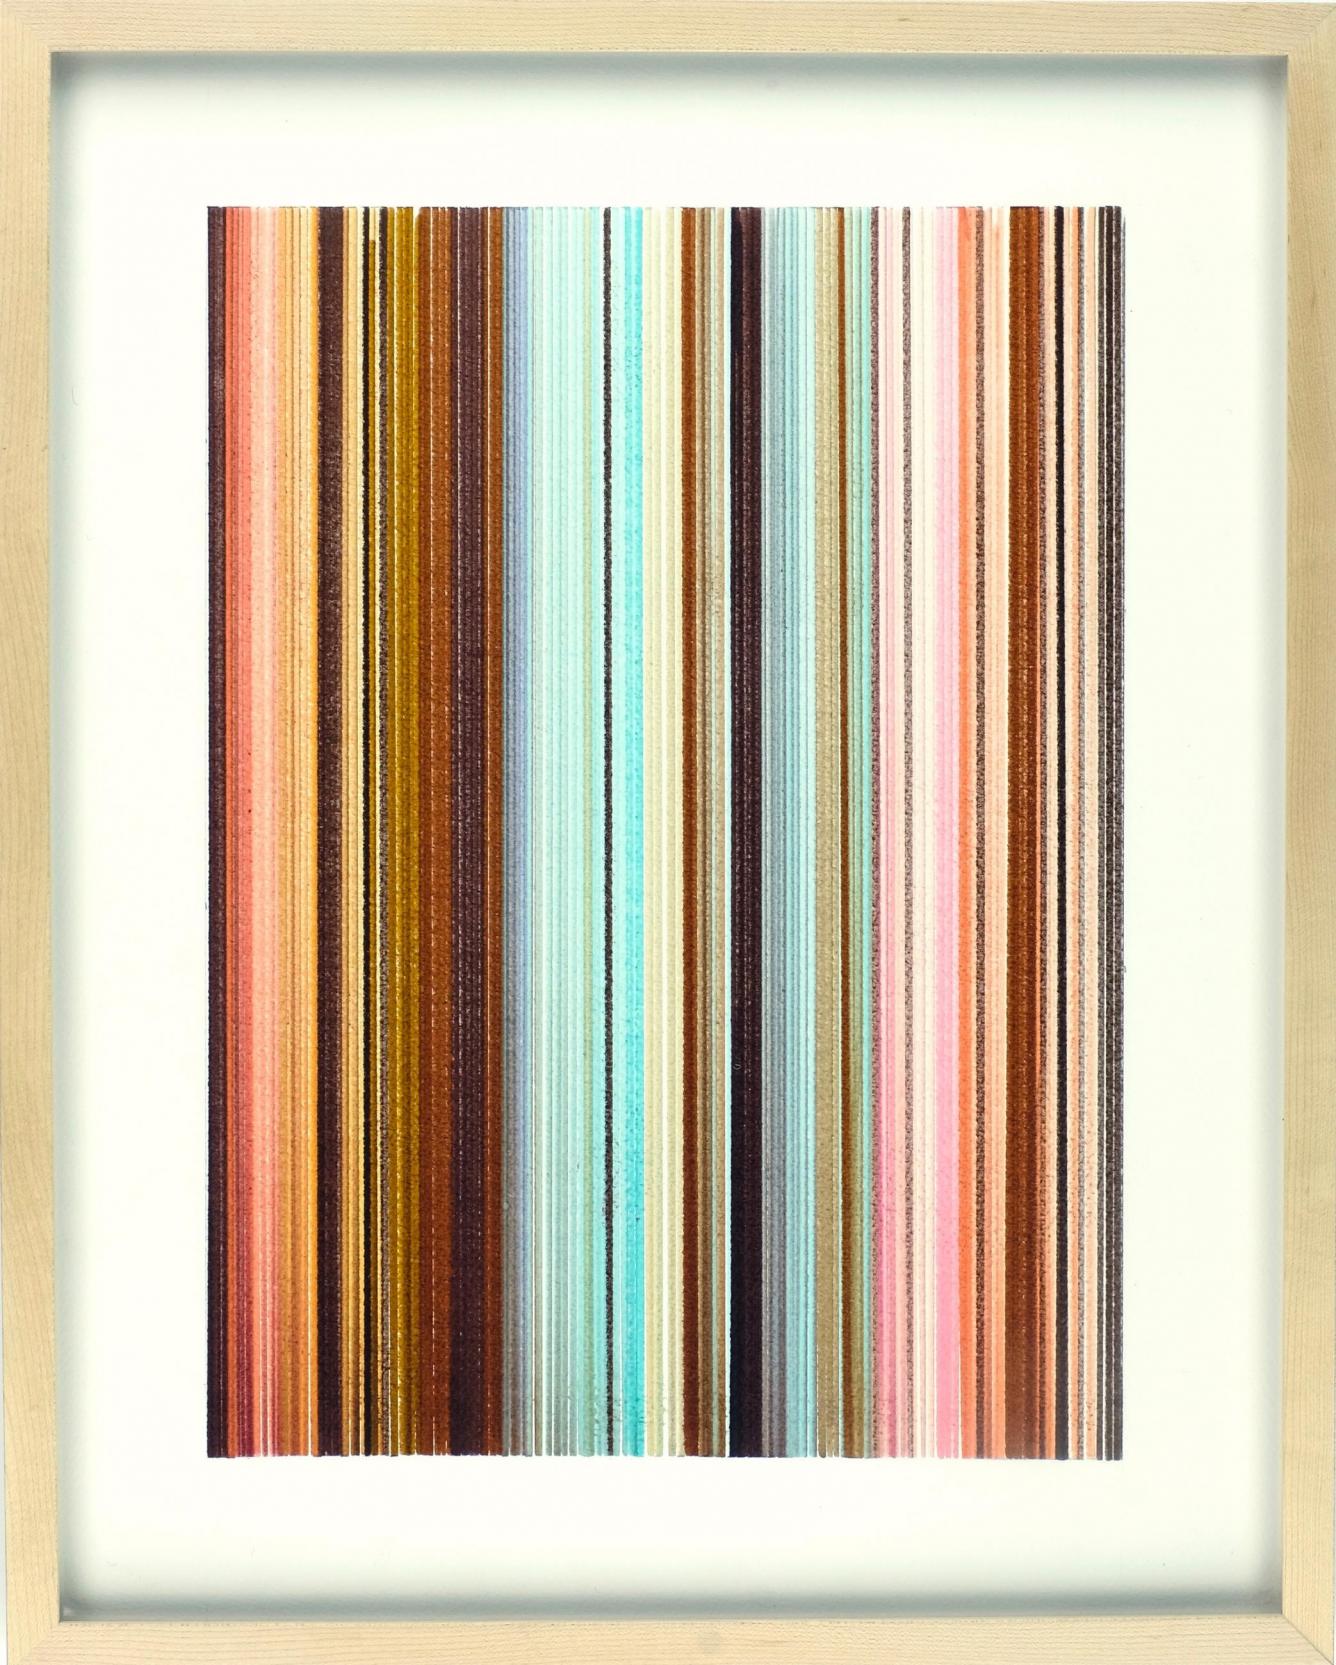 An abstract painting depicting many vertical lines in earth tones. It is almost representative of the layers of the Earth’s crust.